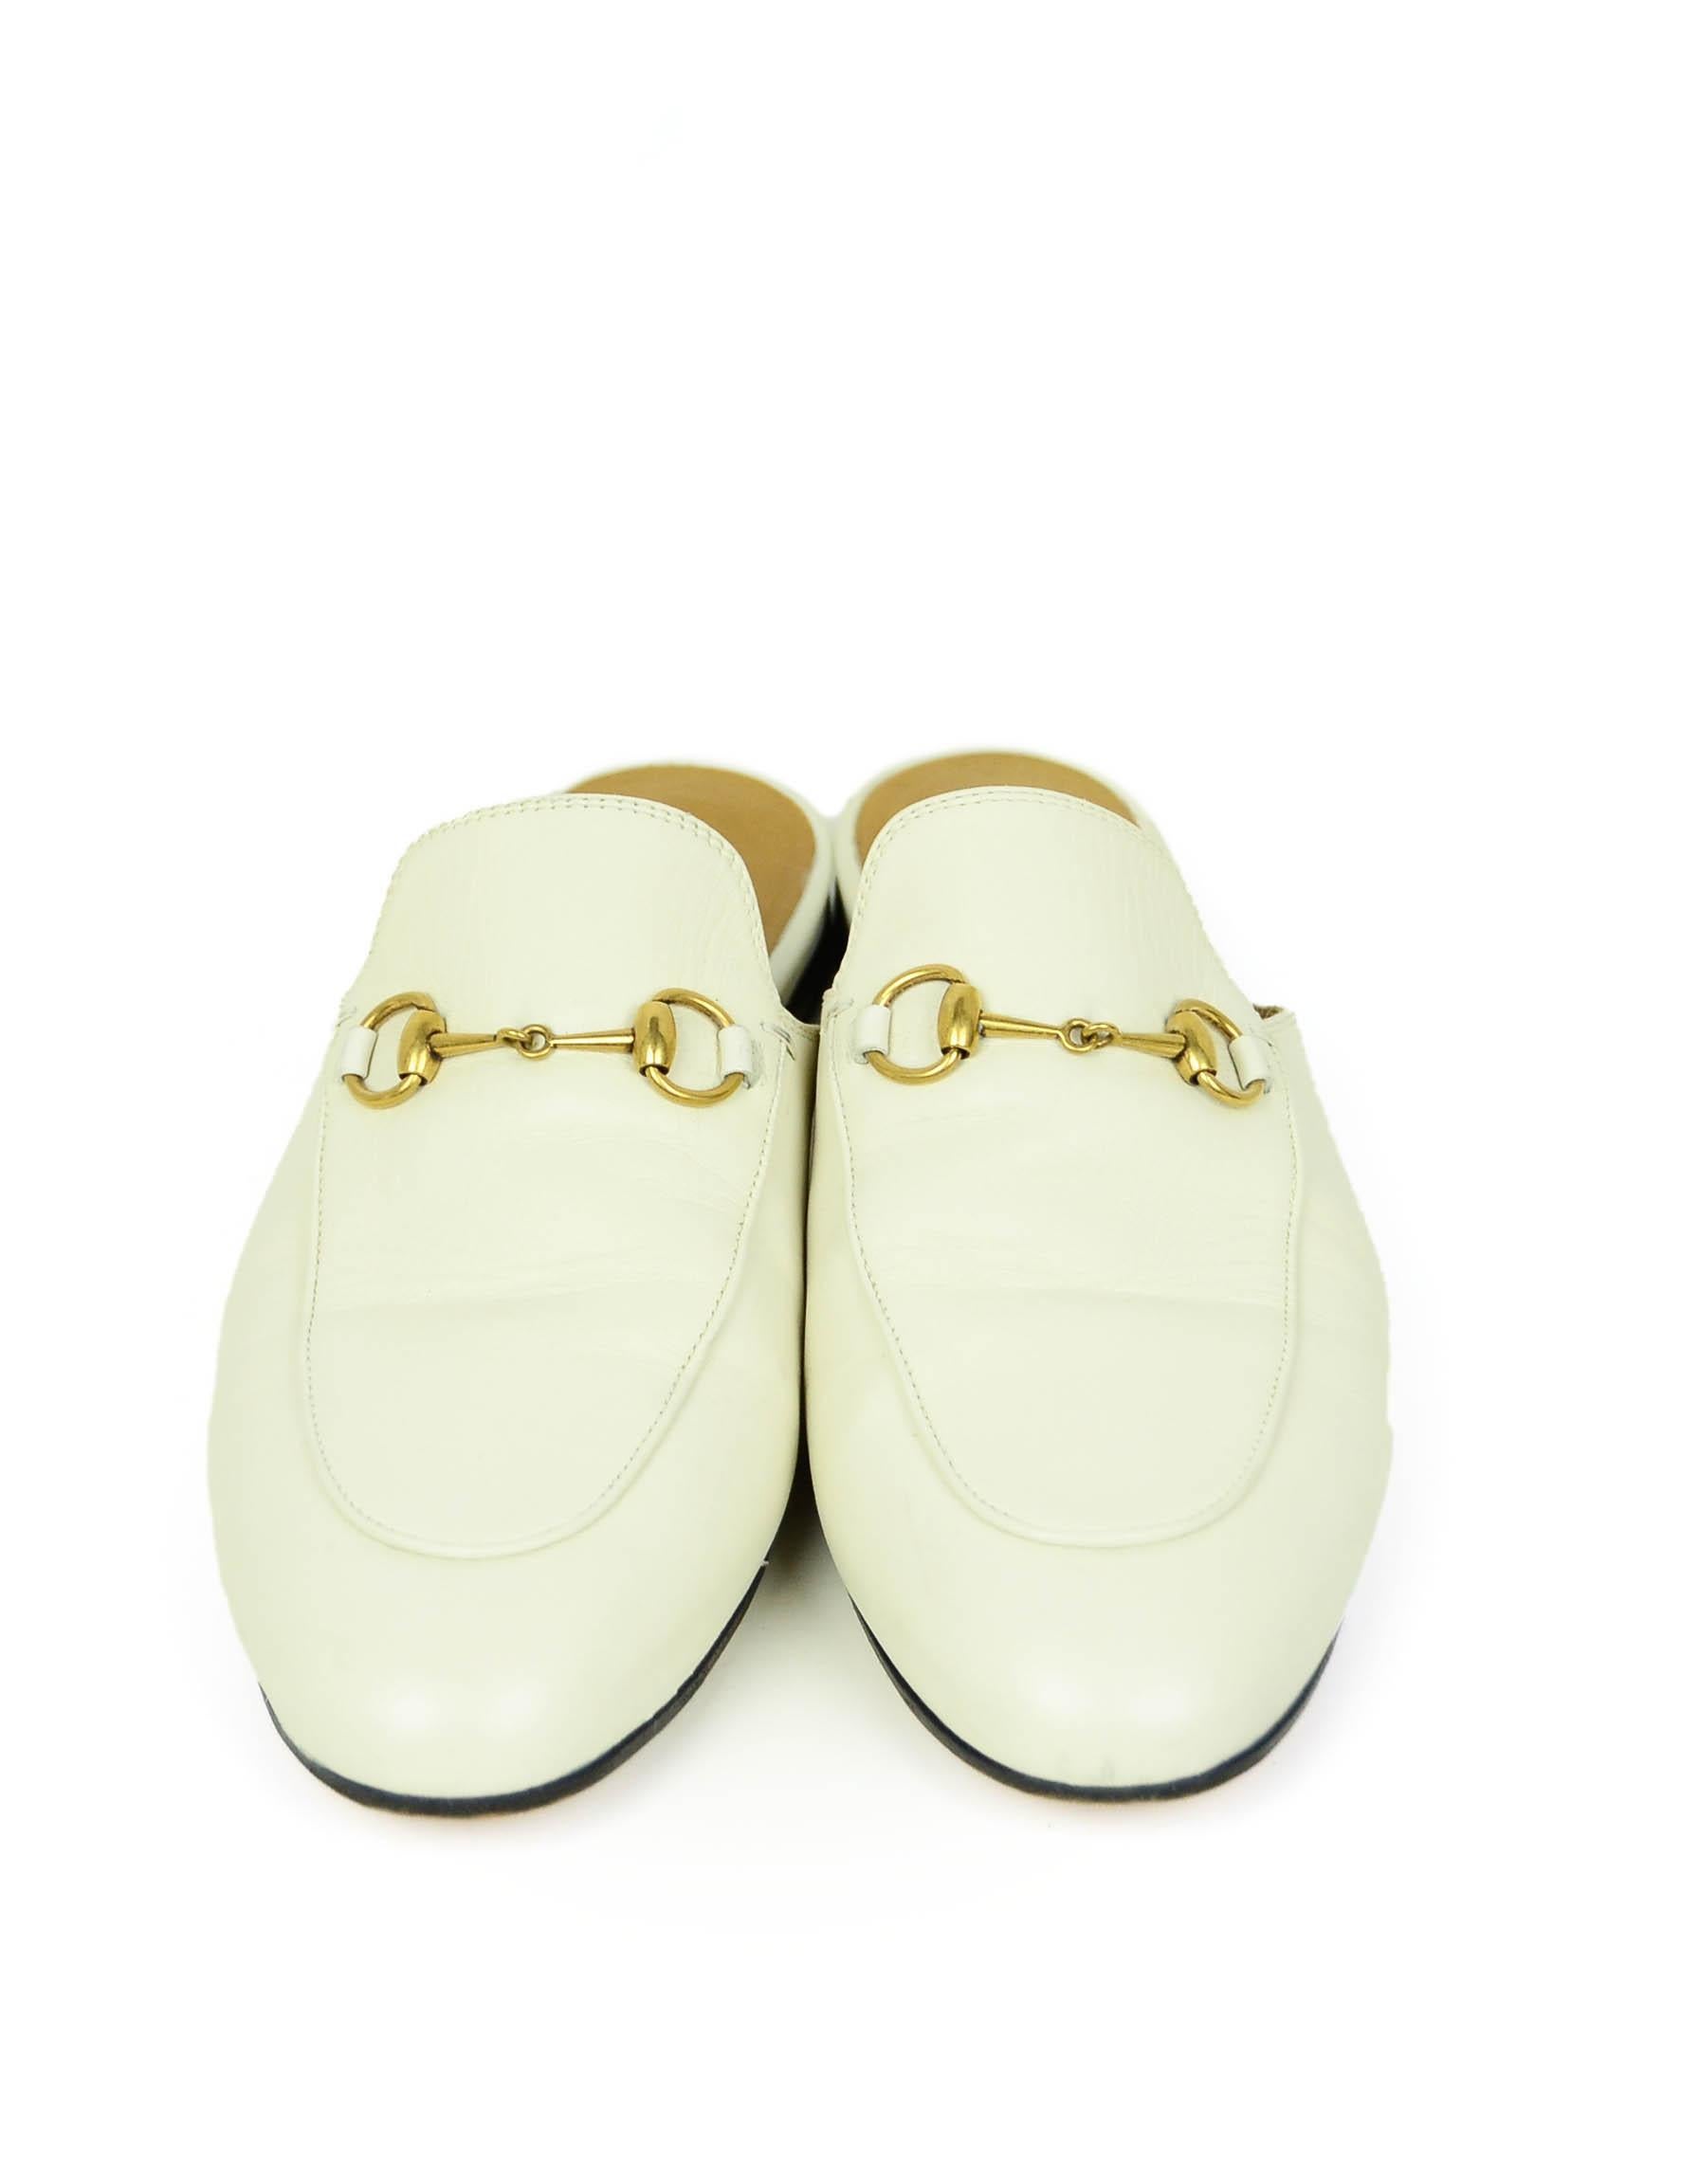 Gucci White Princetown Loafer Mules sz 39.5

Made In: Italy
Year of Production: 2019-2020
Color: Off white
Hardware: Goldtone
Materials: Leather
Closure/Opening: Slip on
Overall Condition: Good pre-owned condition. Significant wear